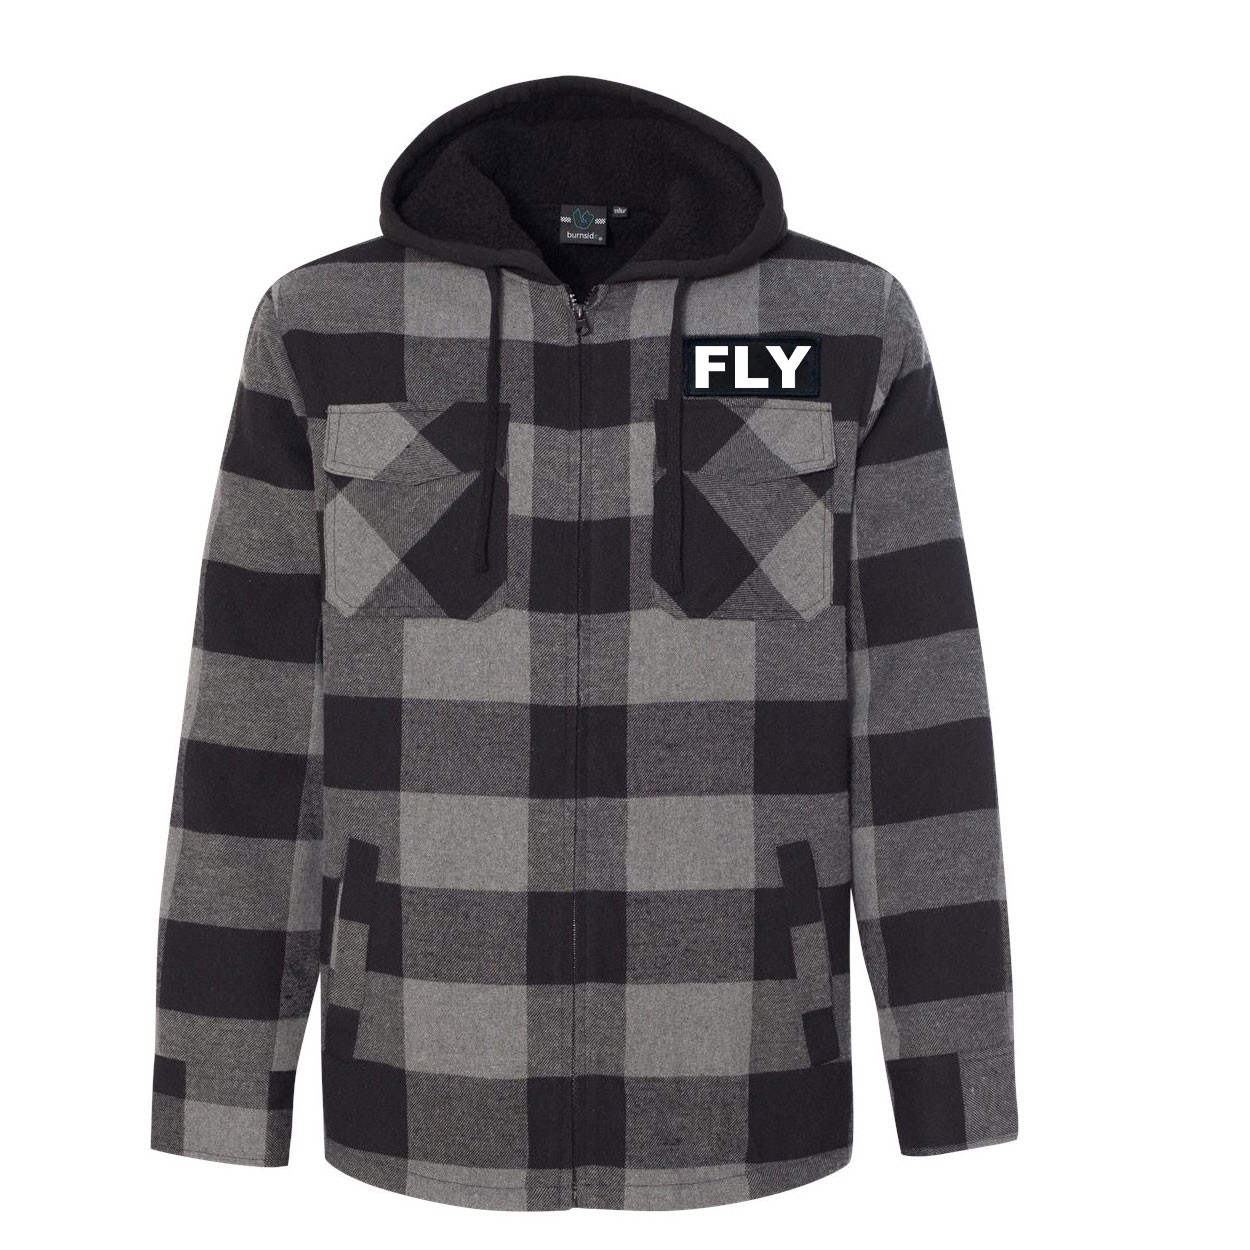 Fly Brand Logo Classic Unisex Full Zip Woven Patch Hooded Flannel Jacket Black/Gray (White Logo)